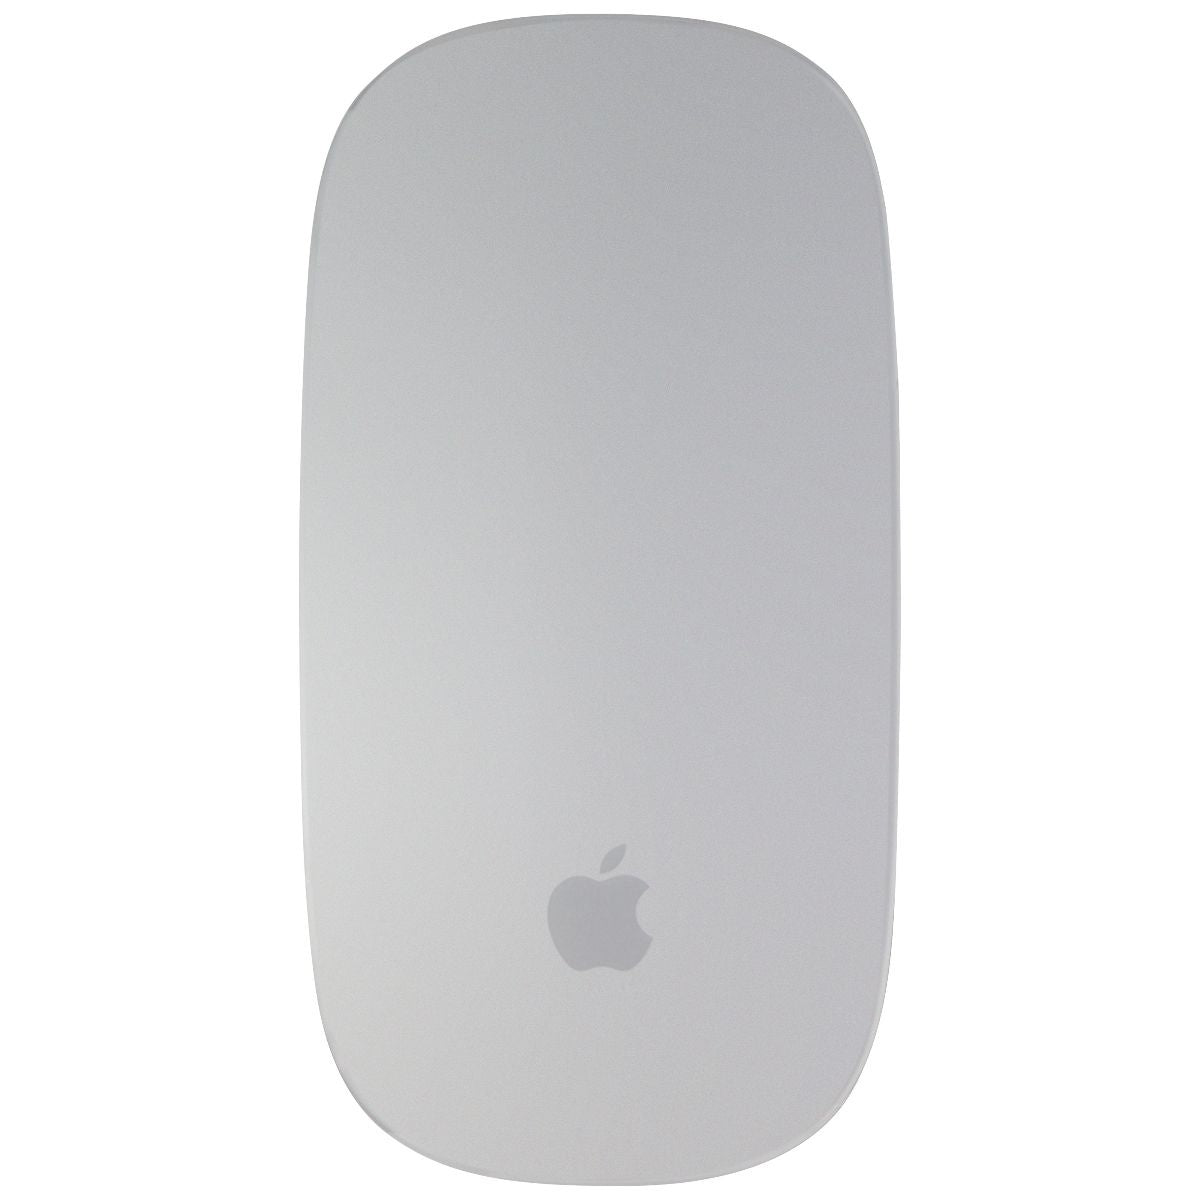 Apple Magic Mouse (Wireless, Rechargeable) A1657 with White Rails (Aftermarket) Keyboards/Mice - Mice, Trackballs & Touchpads Apple    - Simple Cell Bulk Wholesale Pricing - USA Seller